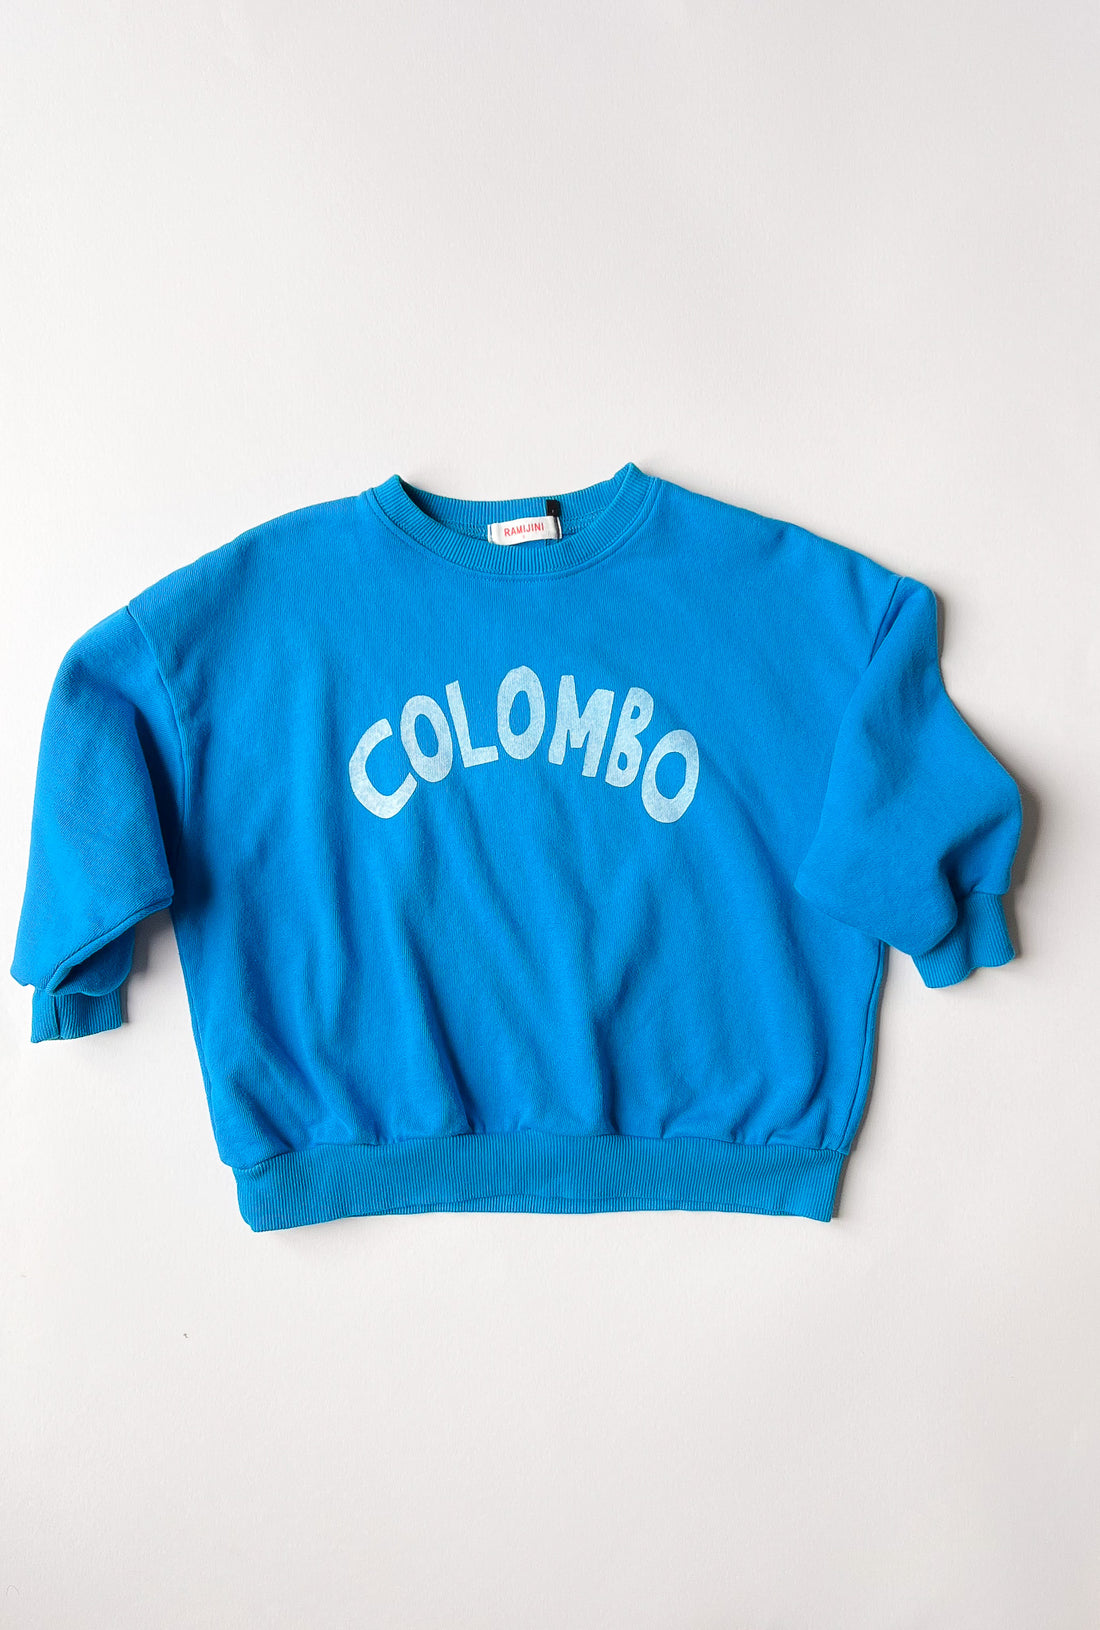 Colombo sweater blue